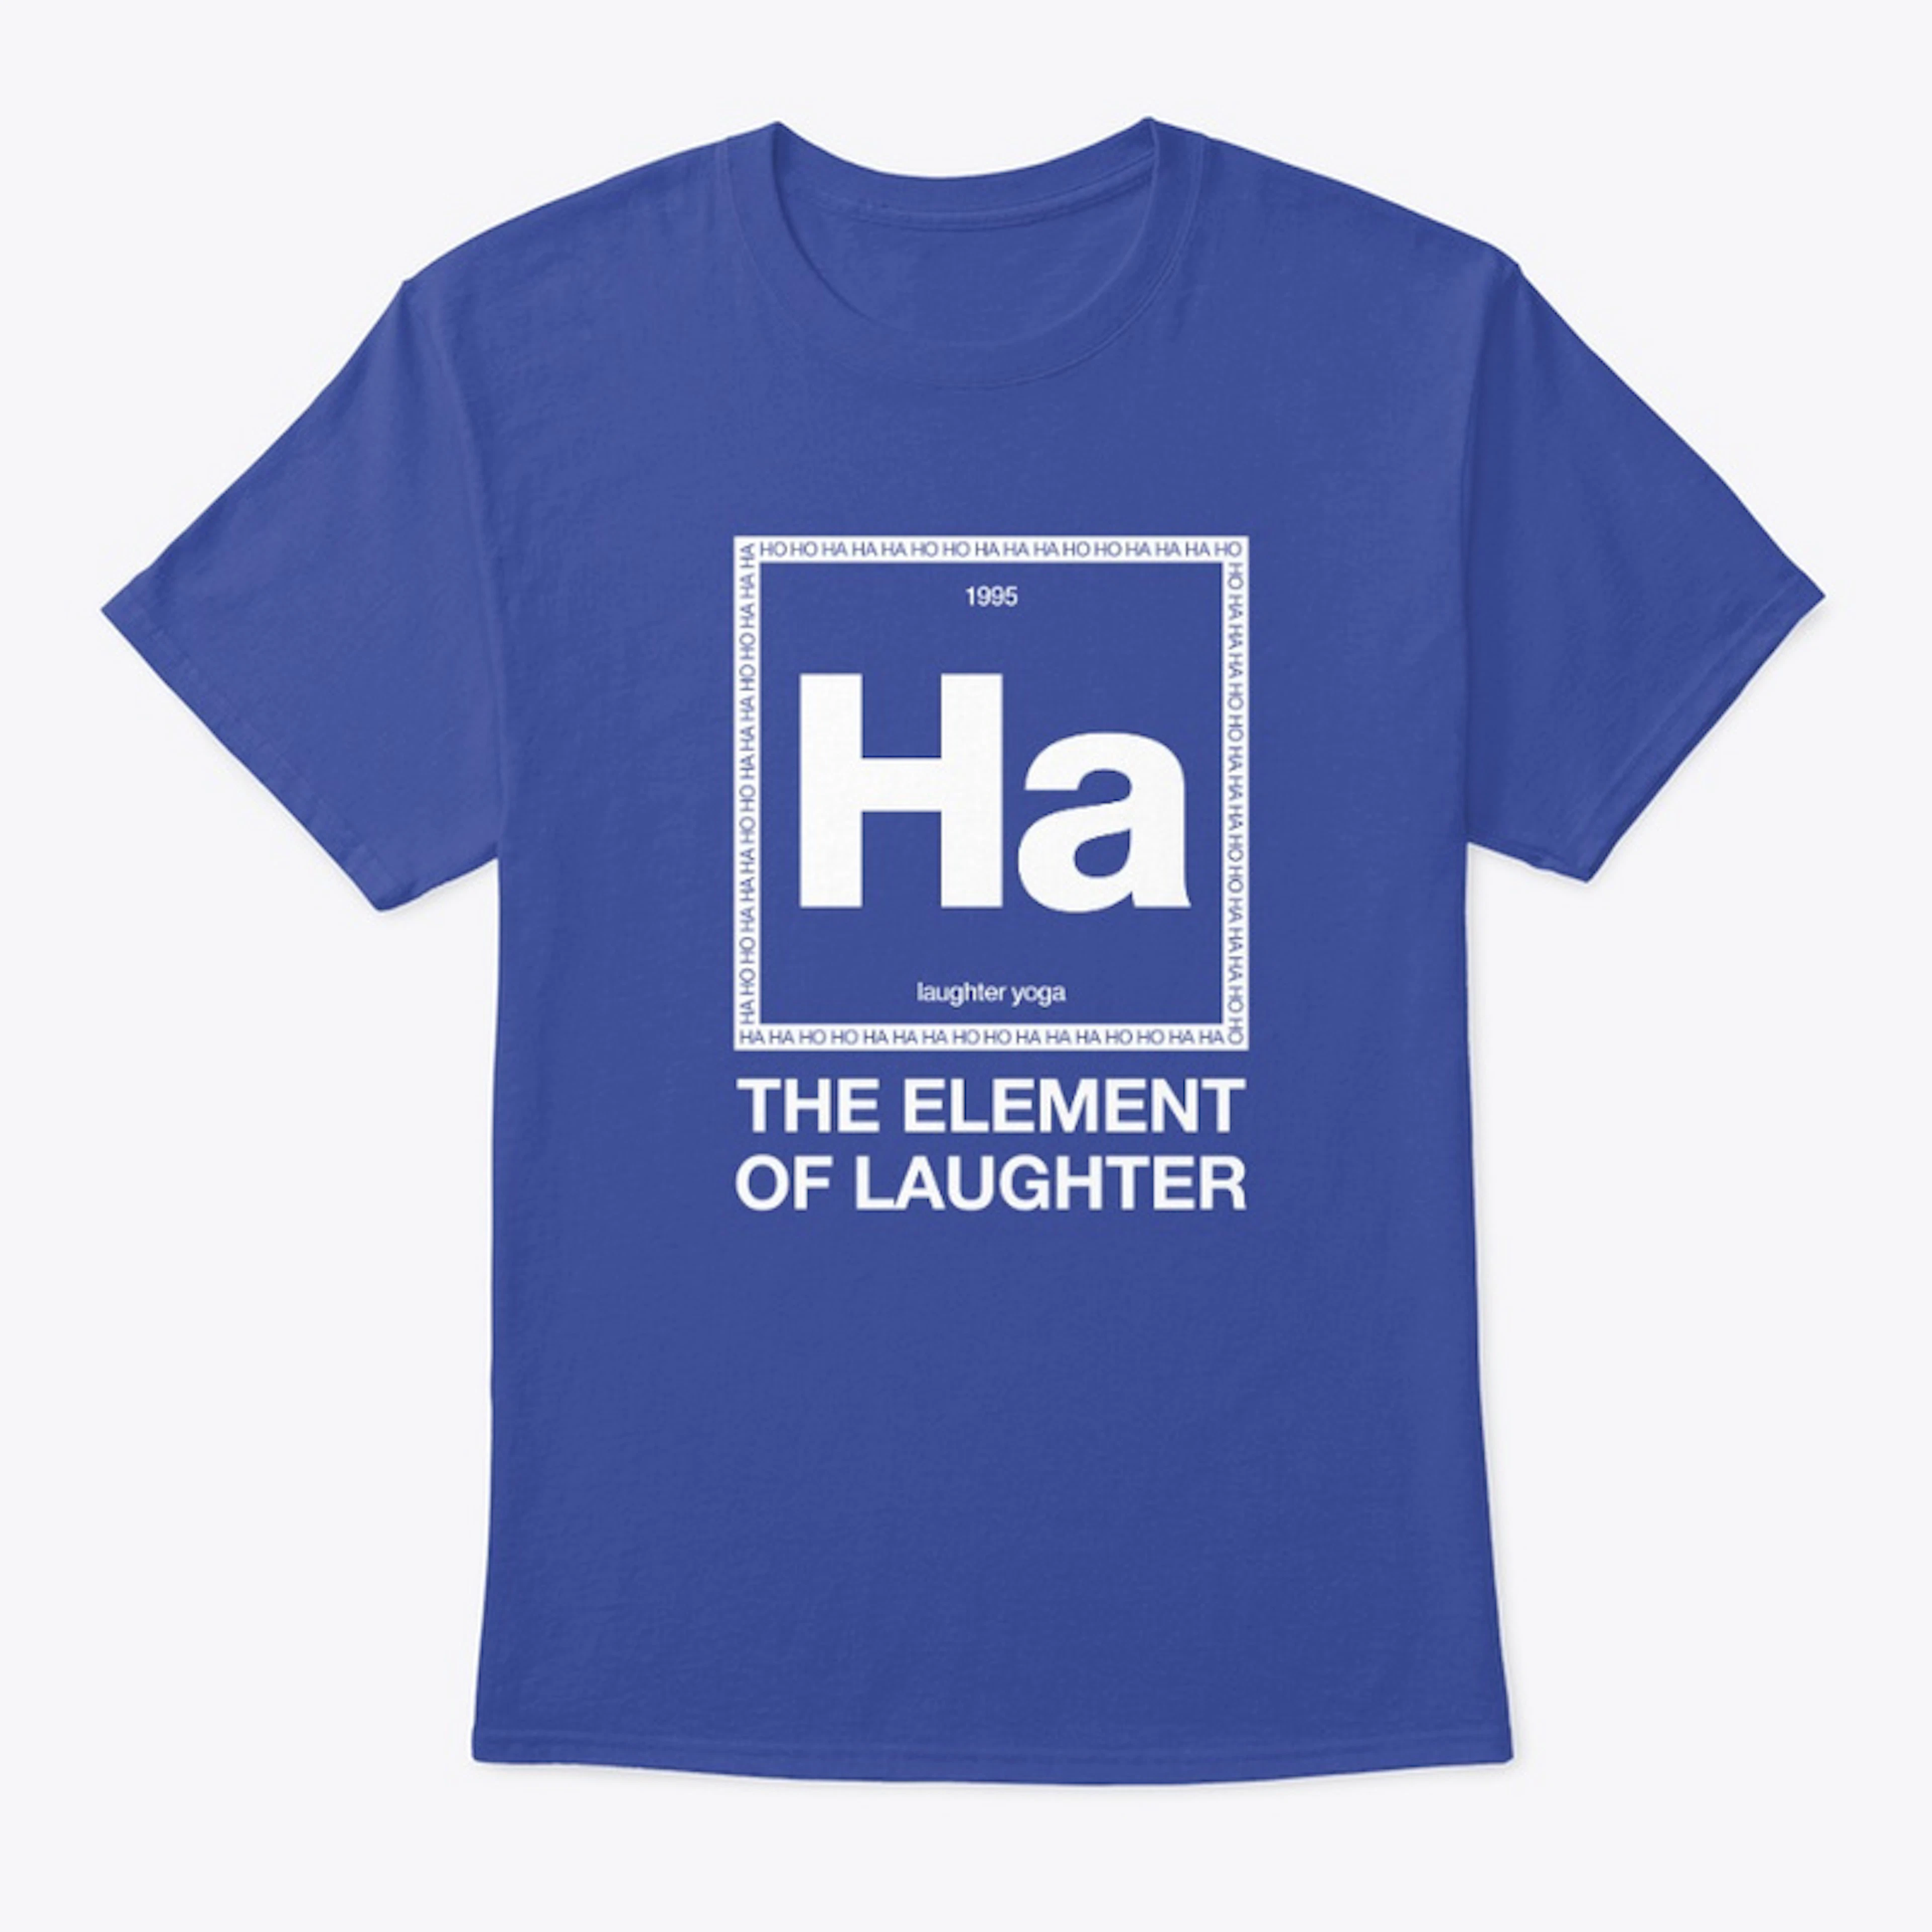 HA - The Element of Laughter